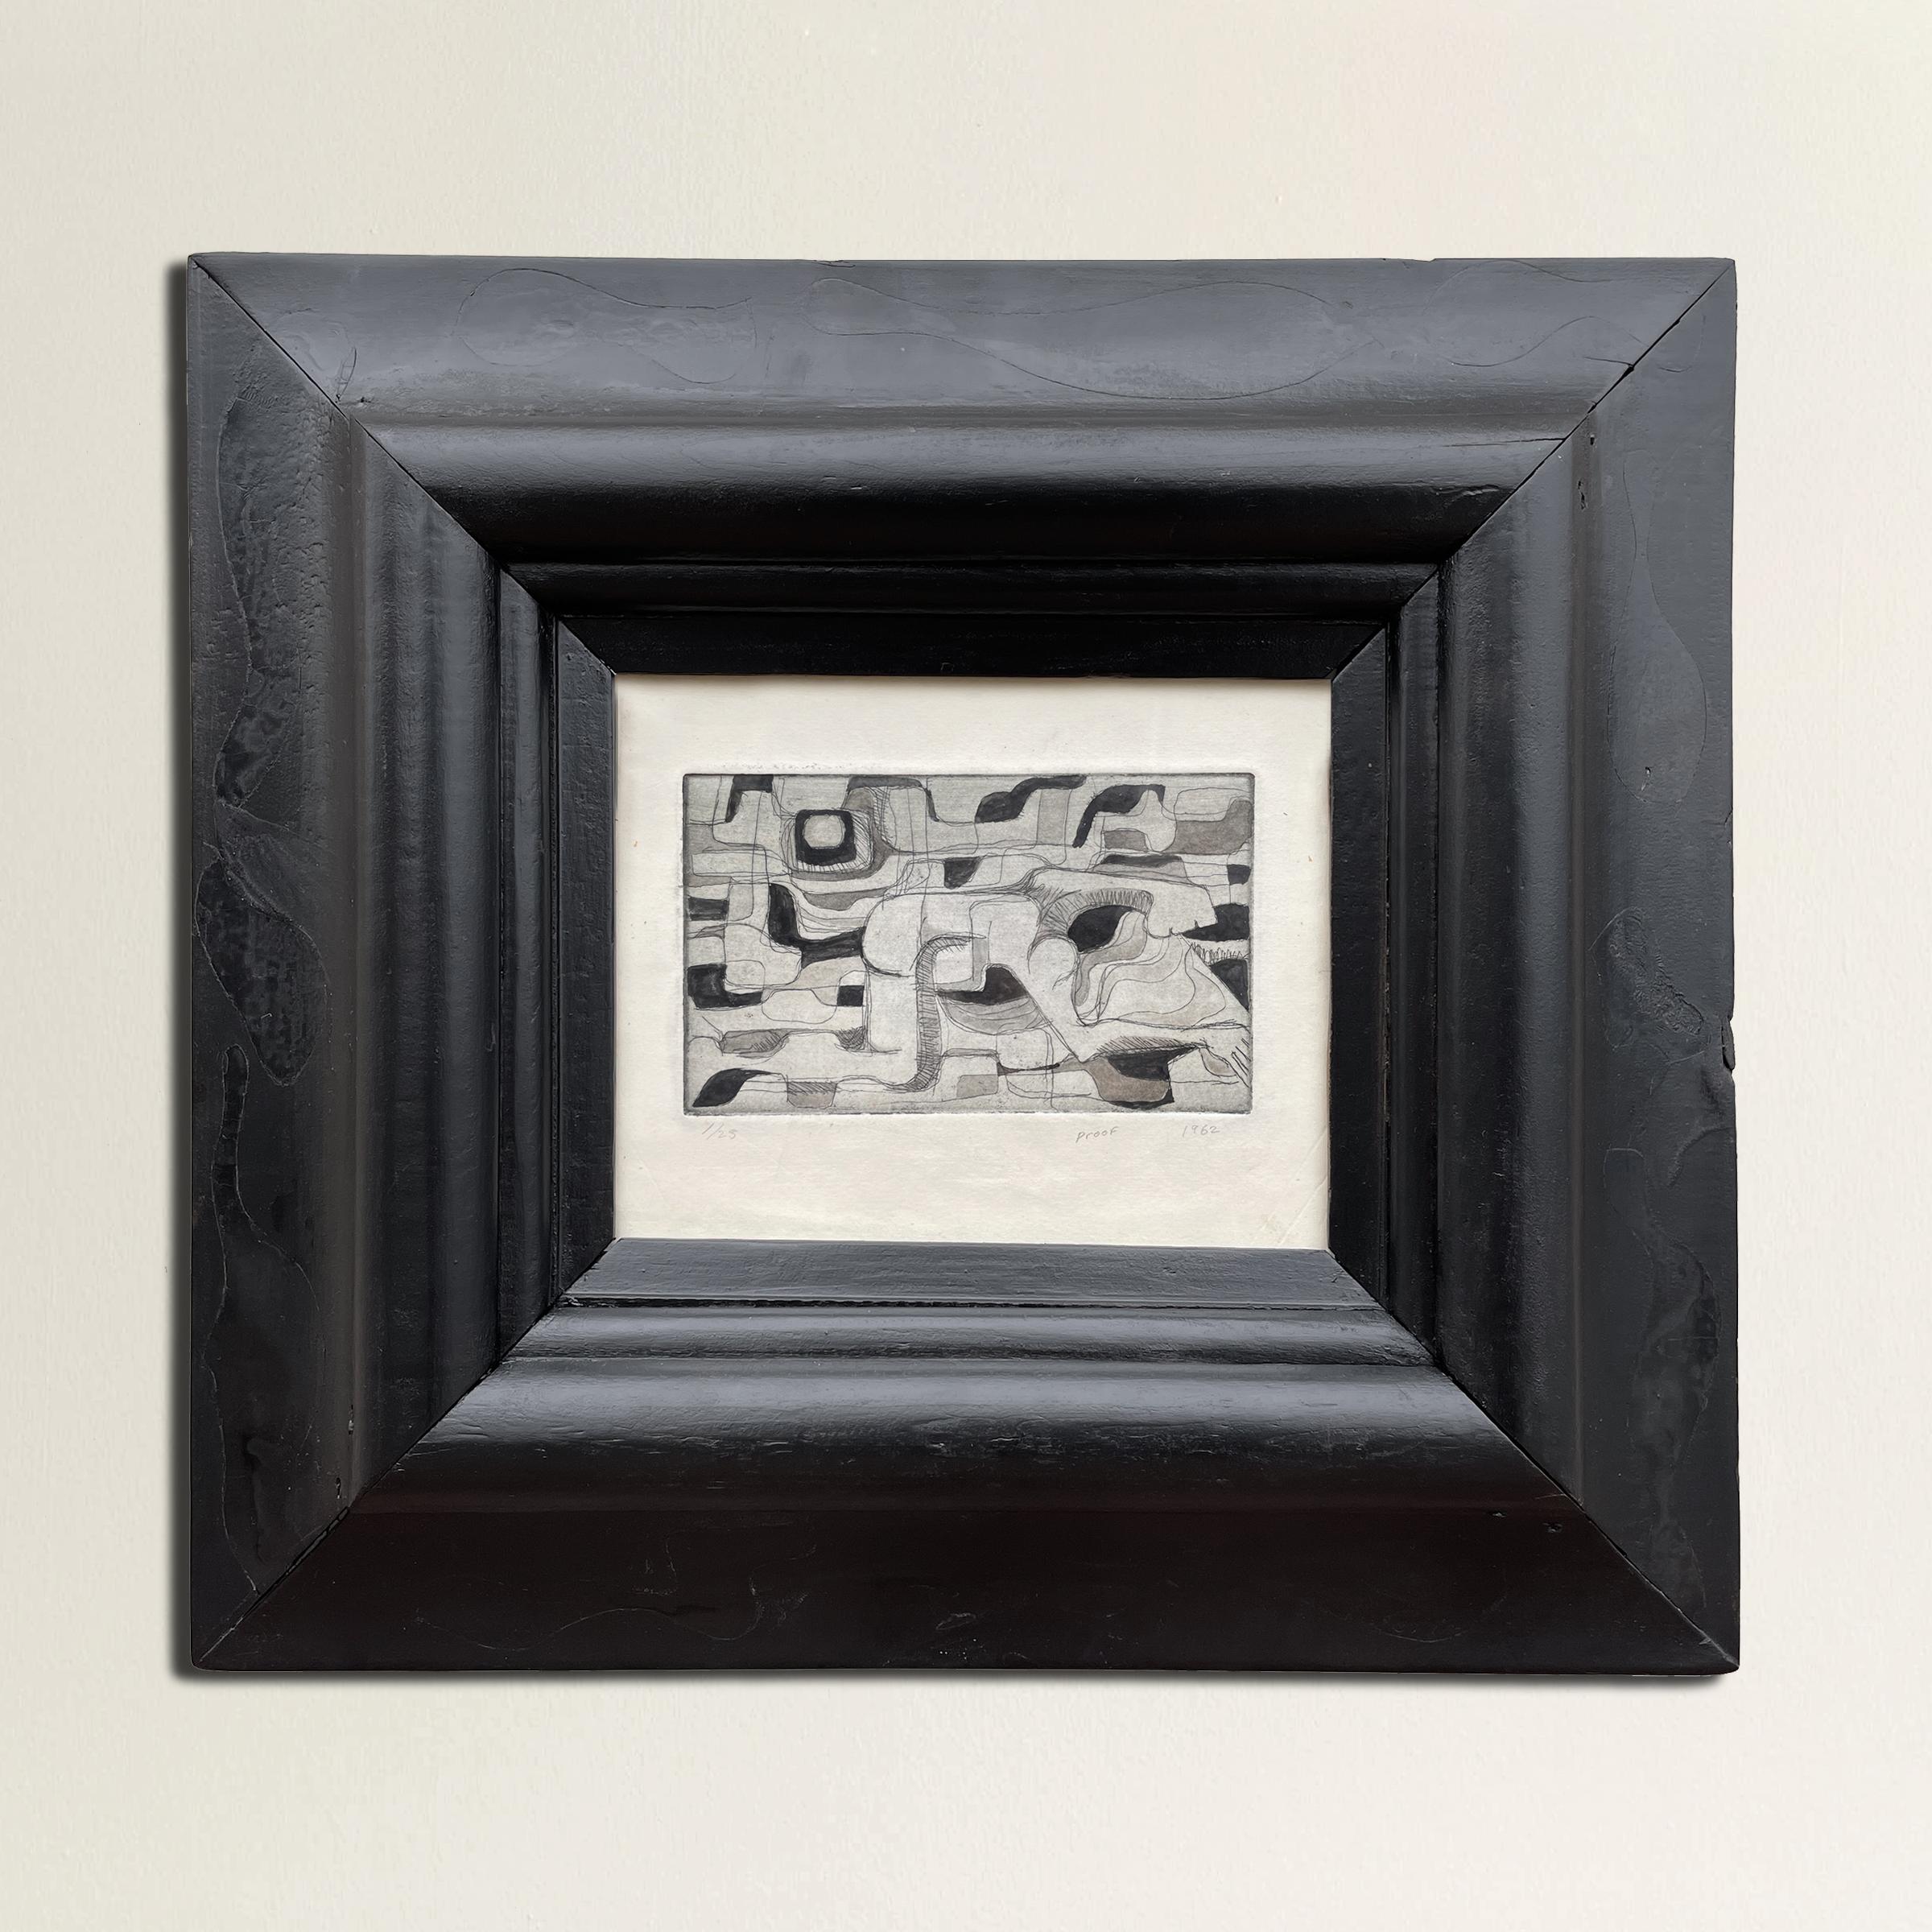 A chic modernist artist proof etching by James Quentin Young depicting a kneeling figure rendered in bold geometric shapes and embellished with gray and black ink. Frame is original and designed by the artist. Not signed. Marked, '1/25, proof, 1962.'